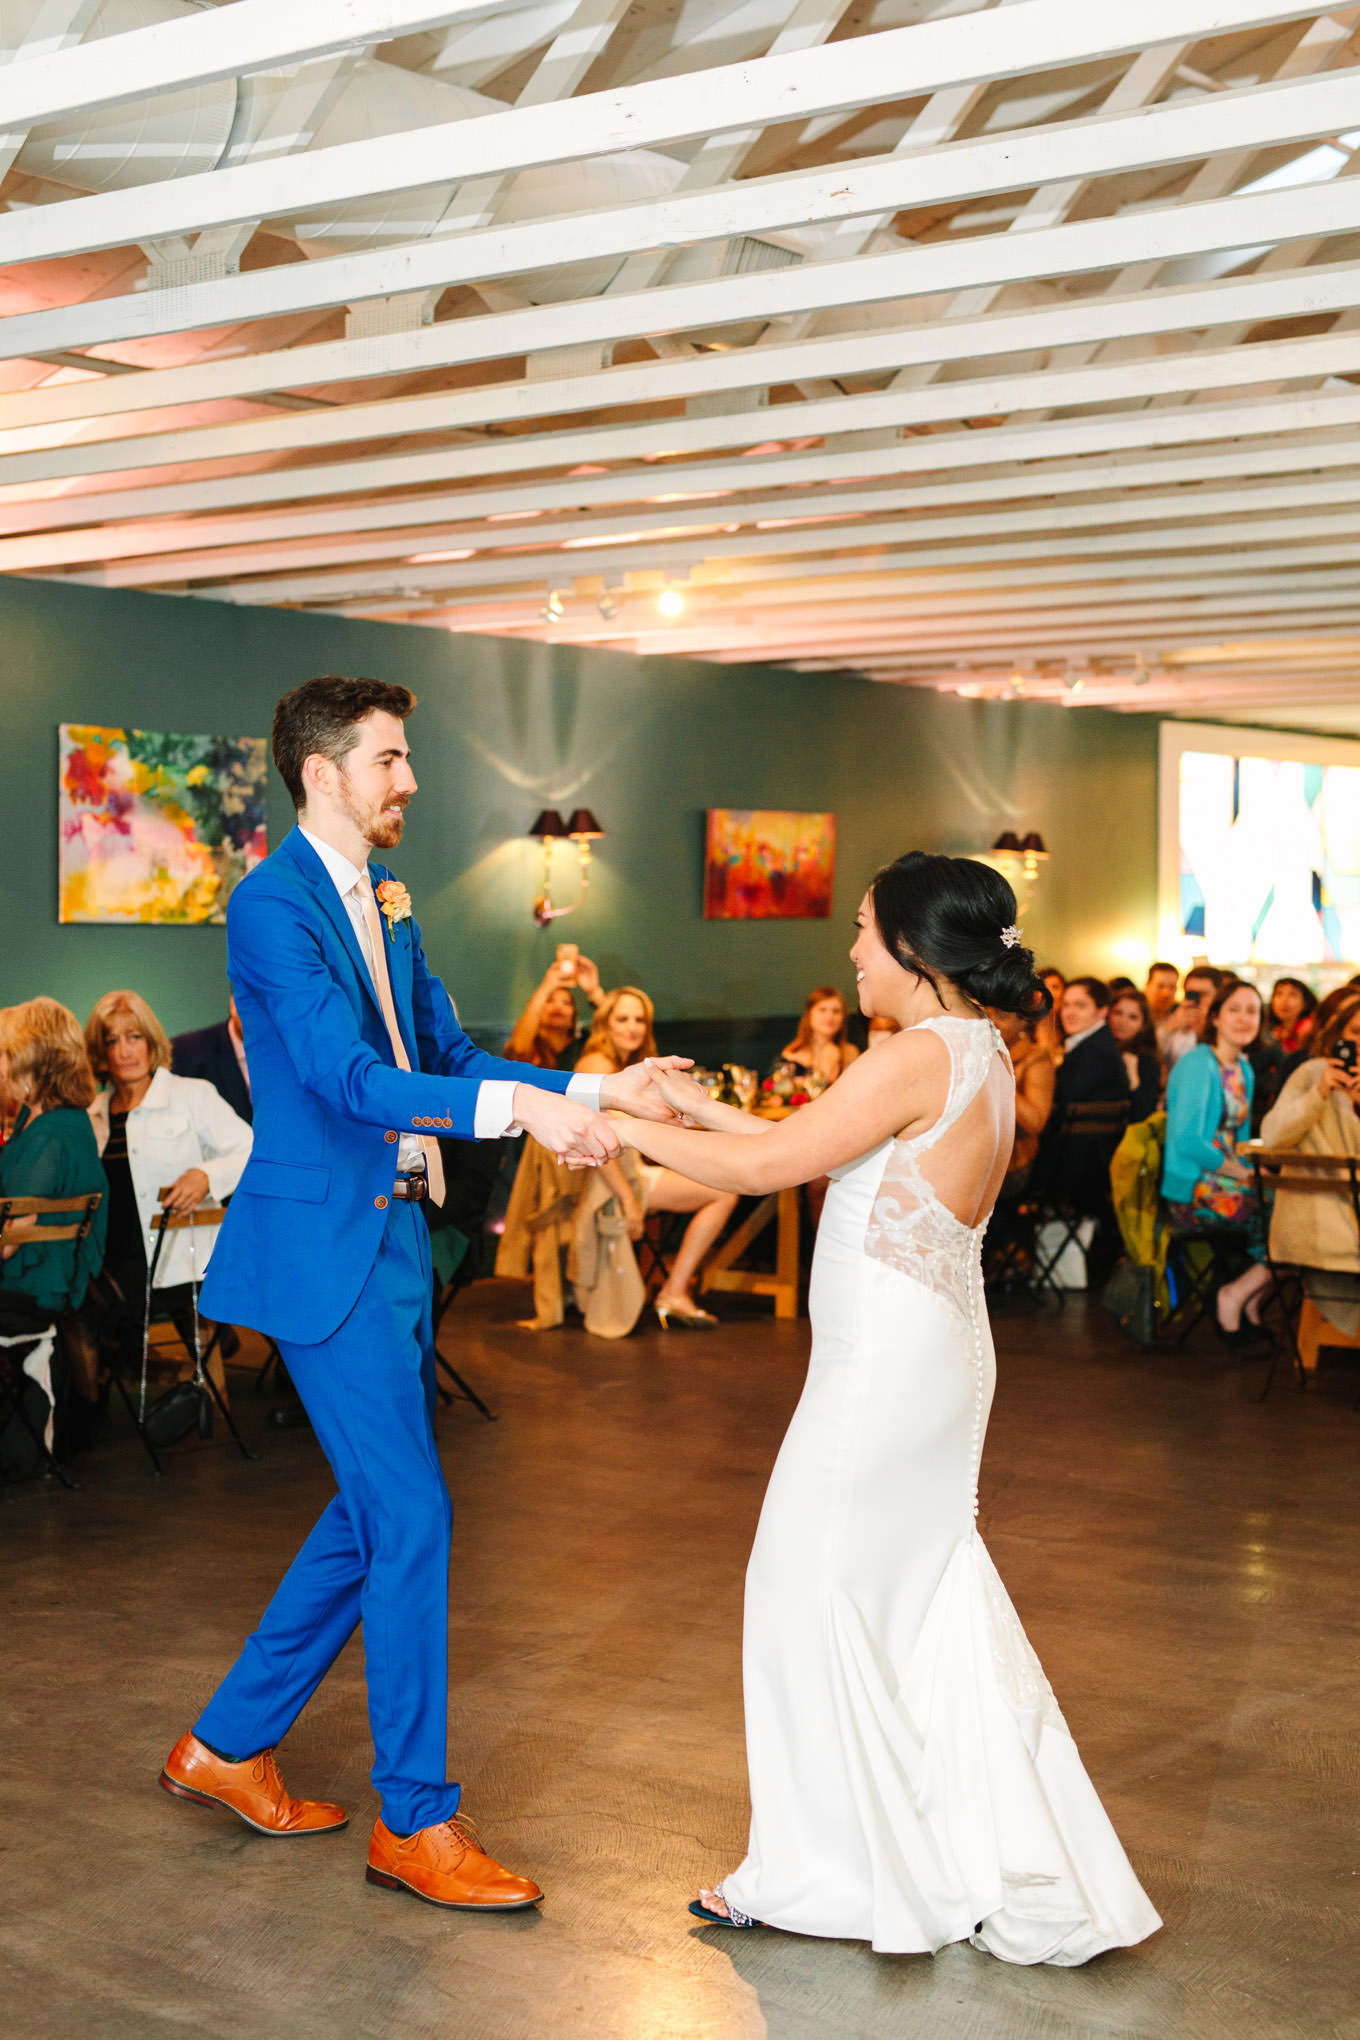 Bride and groom first dance at reception | TV inspired wedding at The Fig House Los Angeles | Published on The Knot | Fresh and colorful photography for fun-loving couples in Southern California | #losangeleswedding #TVwedding #colorfulwedding #theknot   Source: Mary Costa Photography | Los Angeles wedding photographer